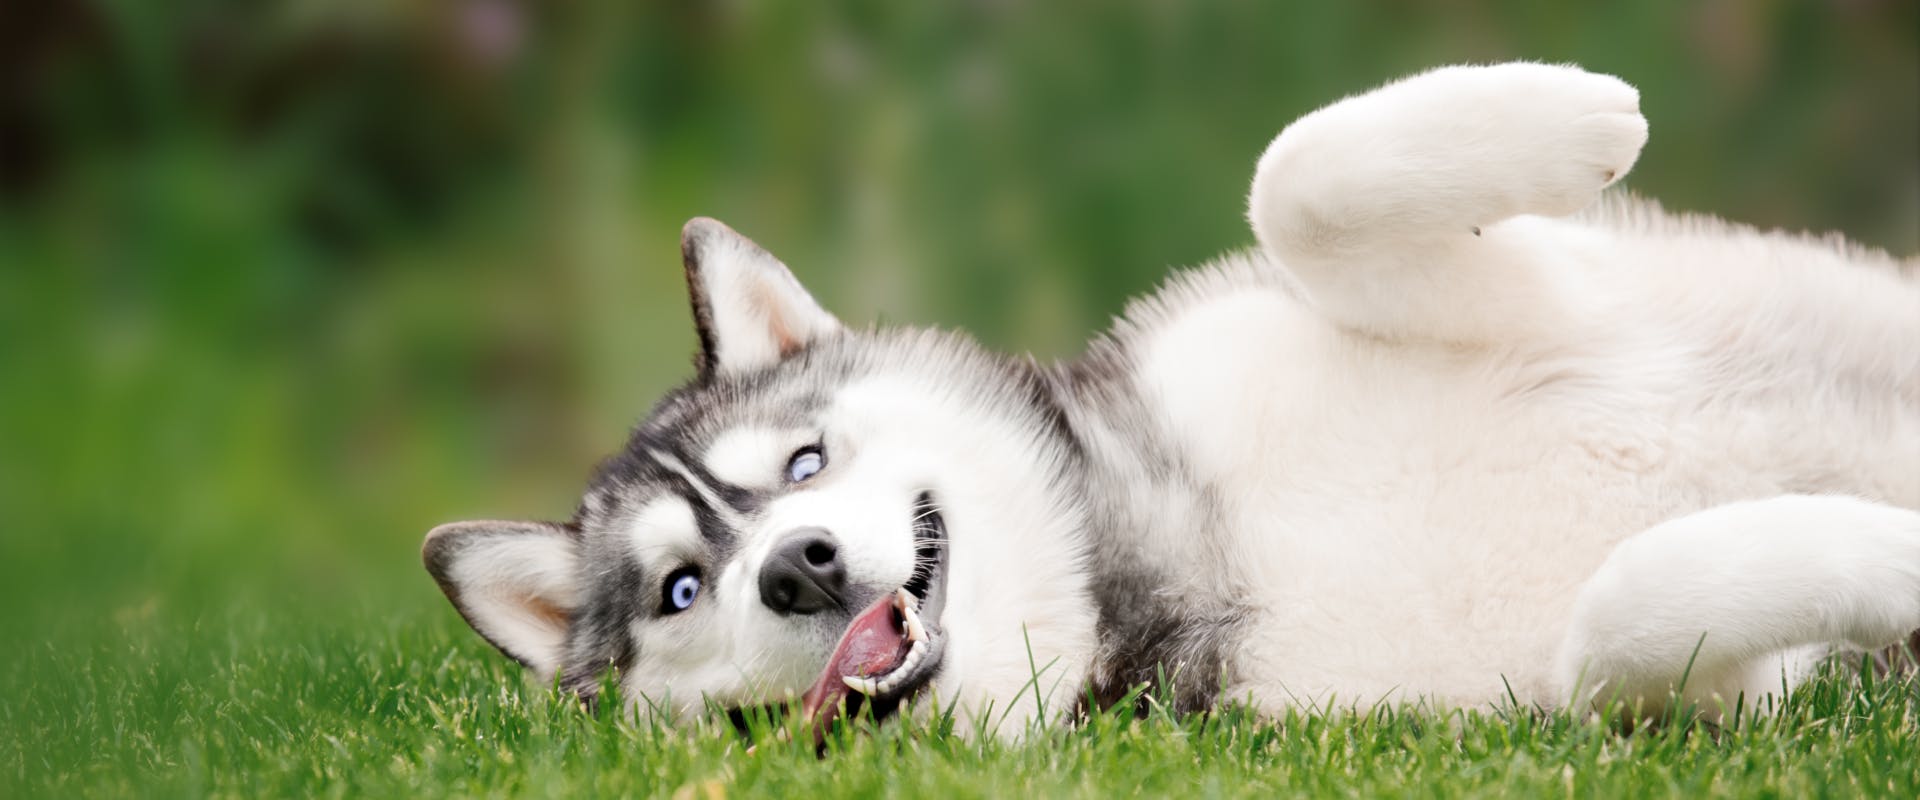 A Husky lies on its side in some grass.